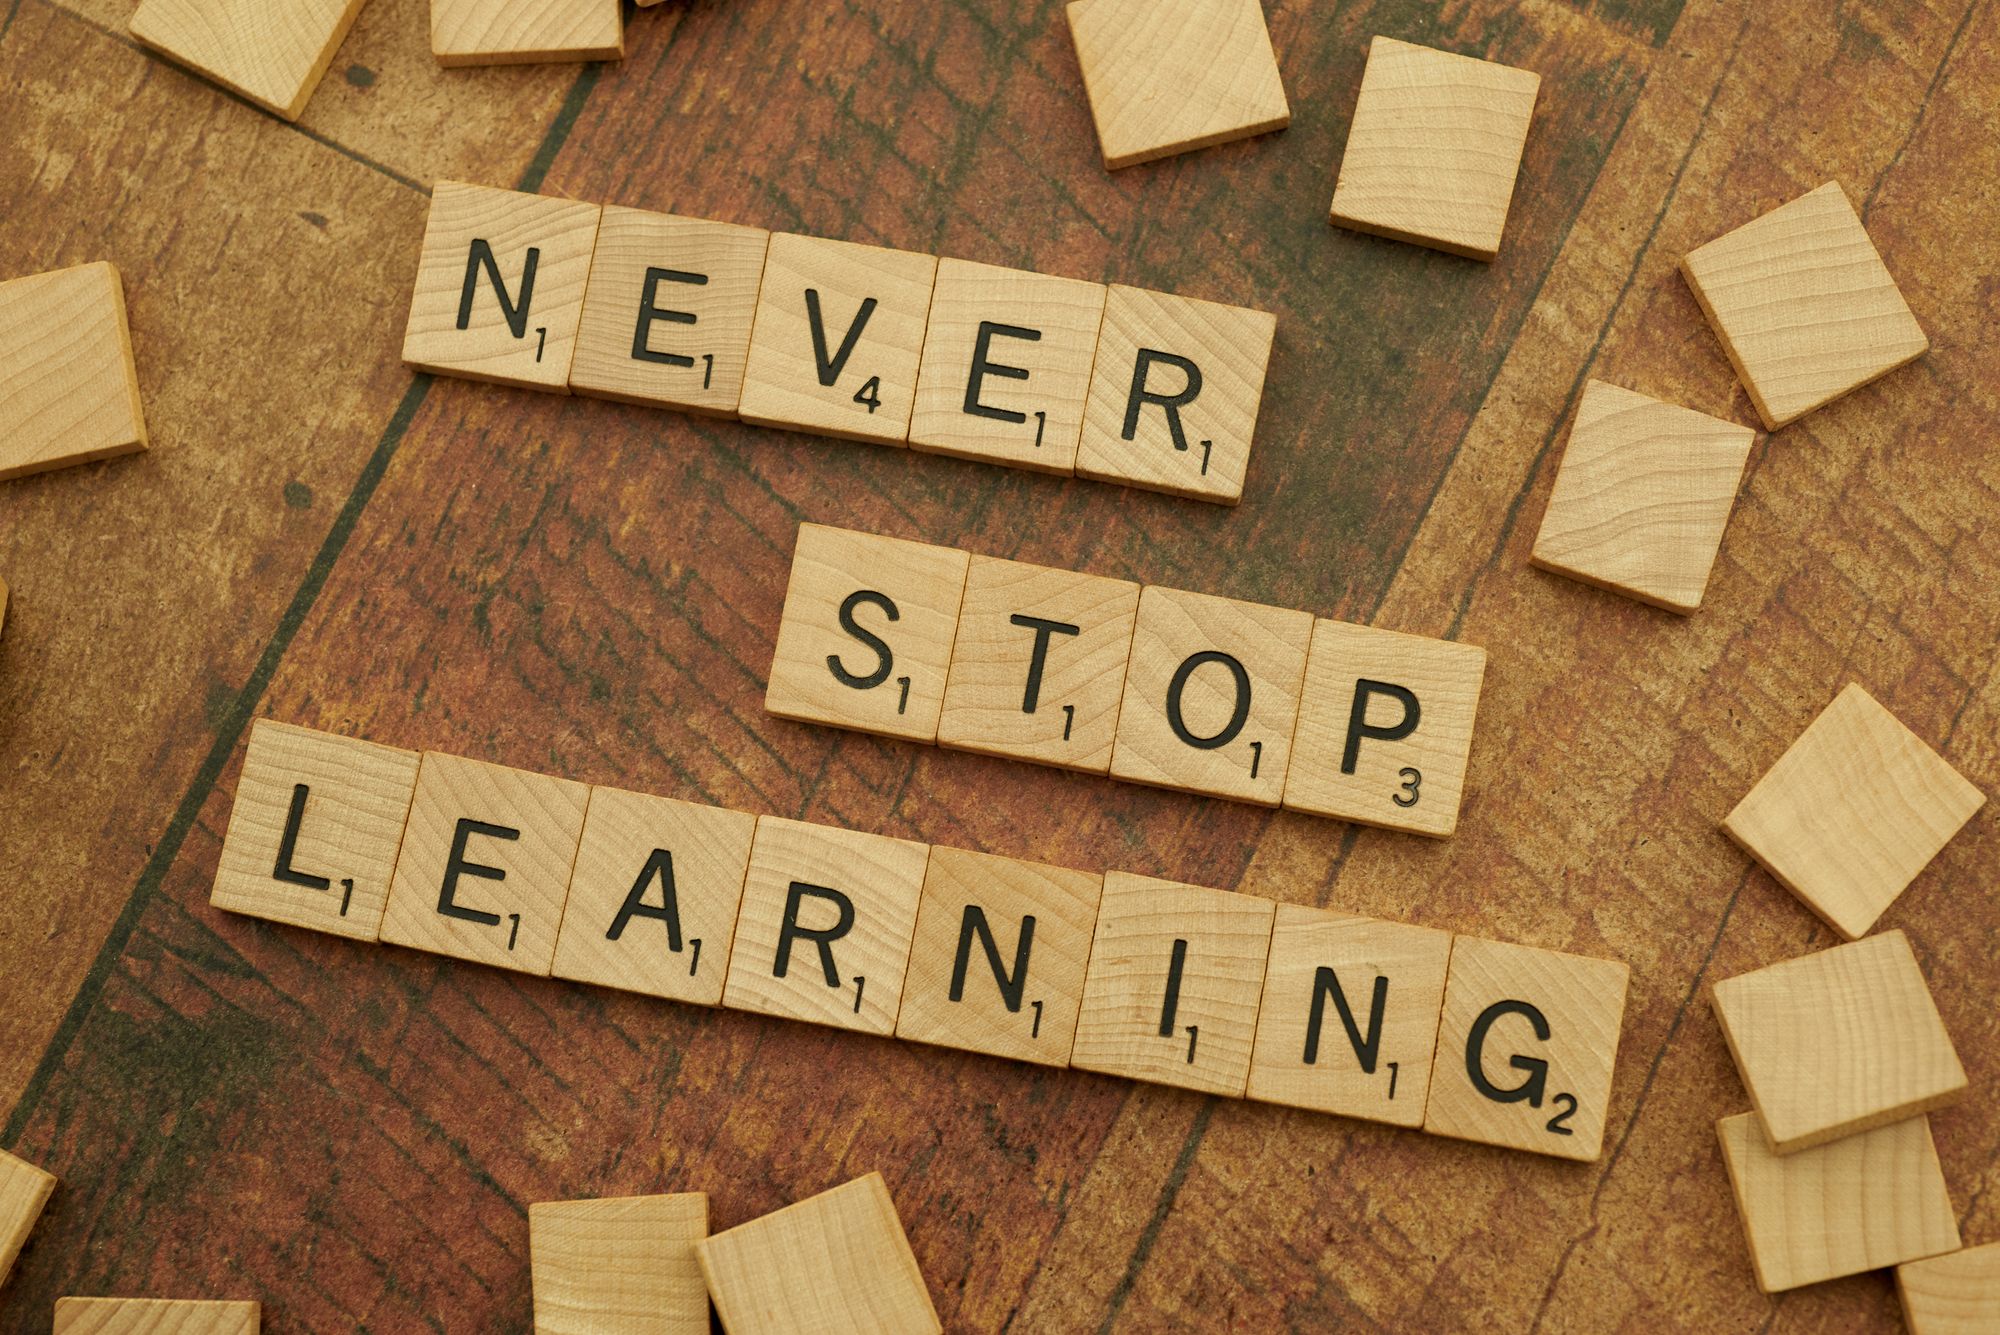 Word Letters Free Stock Image, never stop learning spelled out